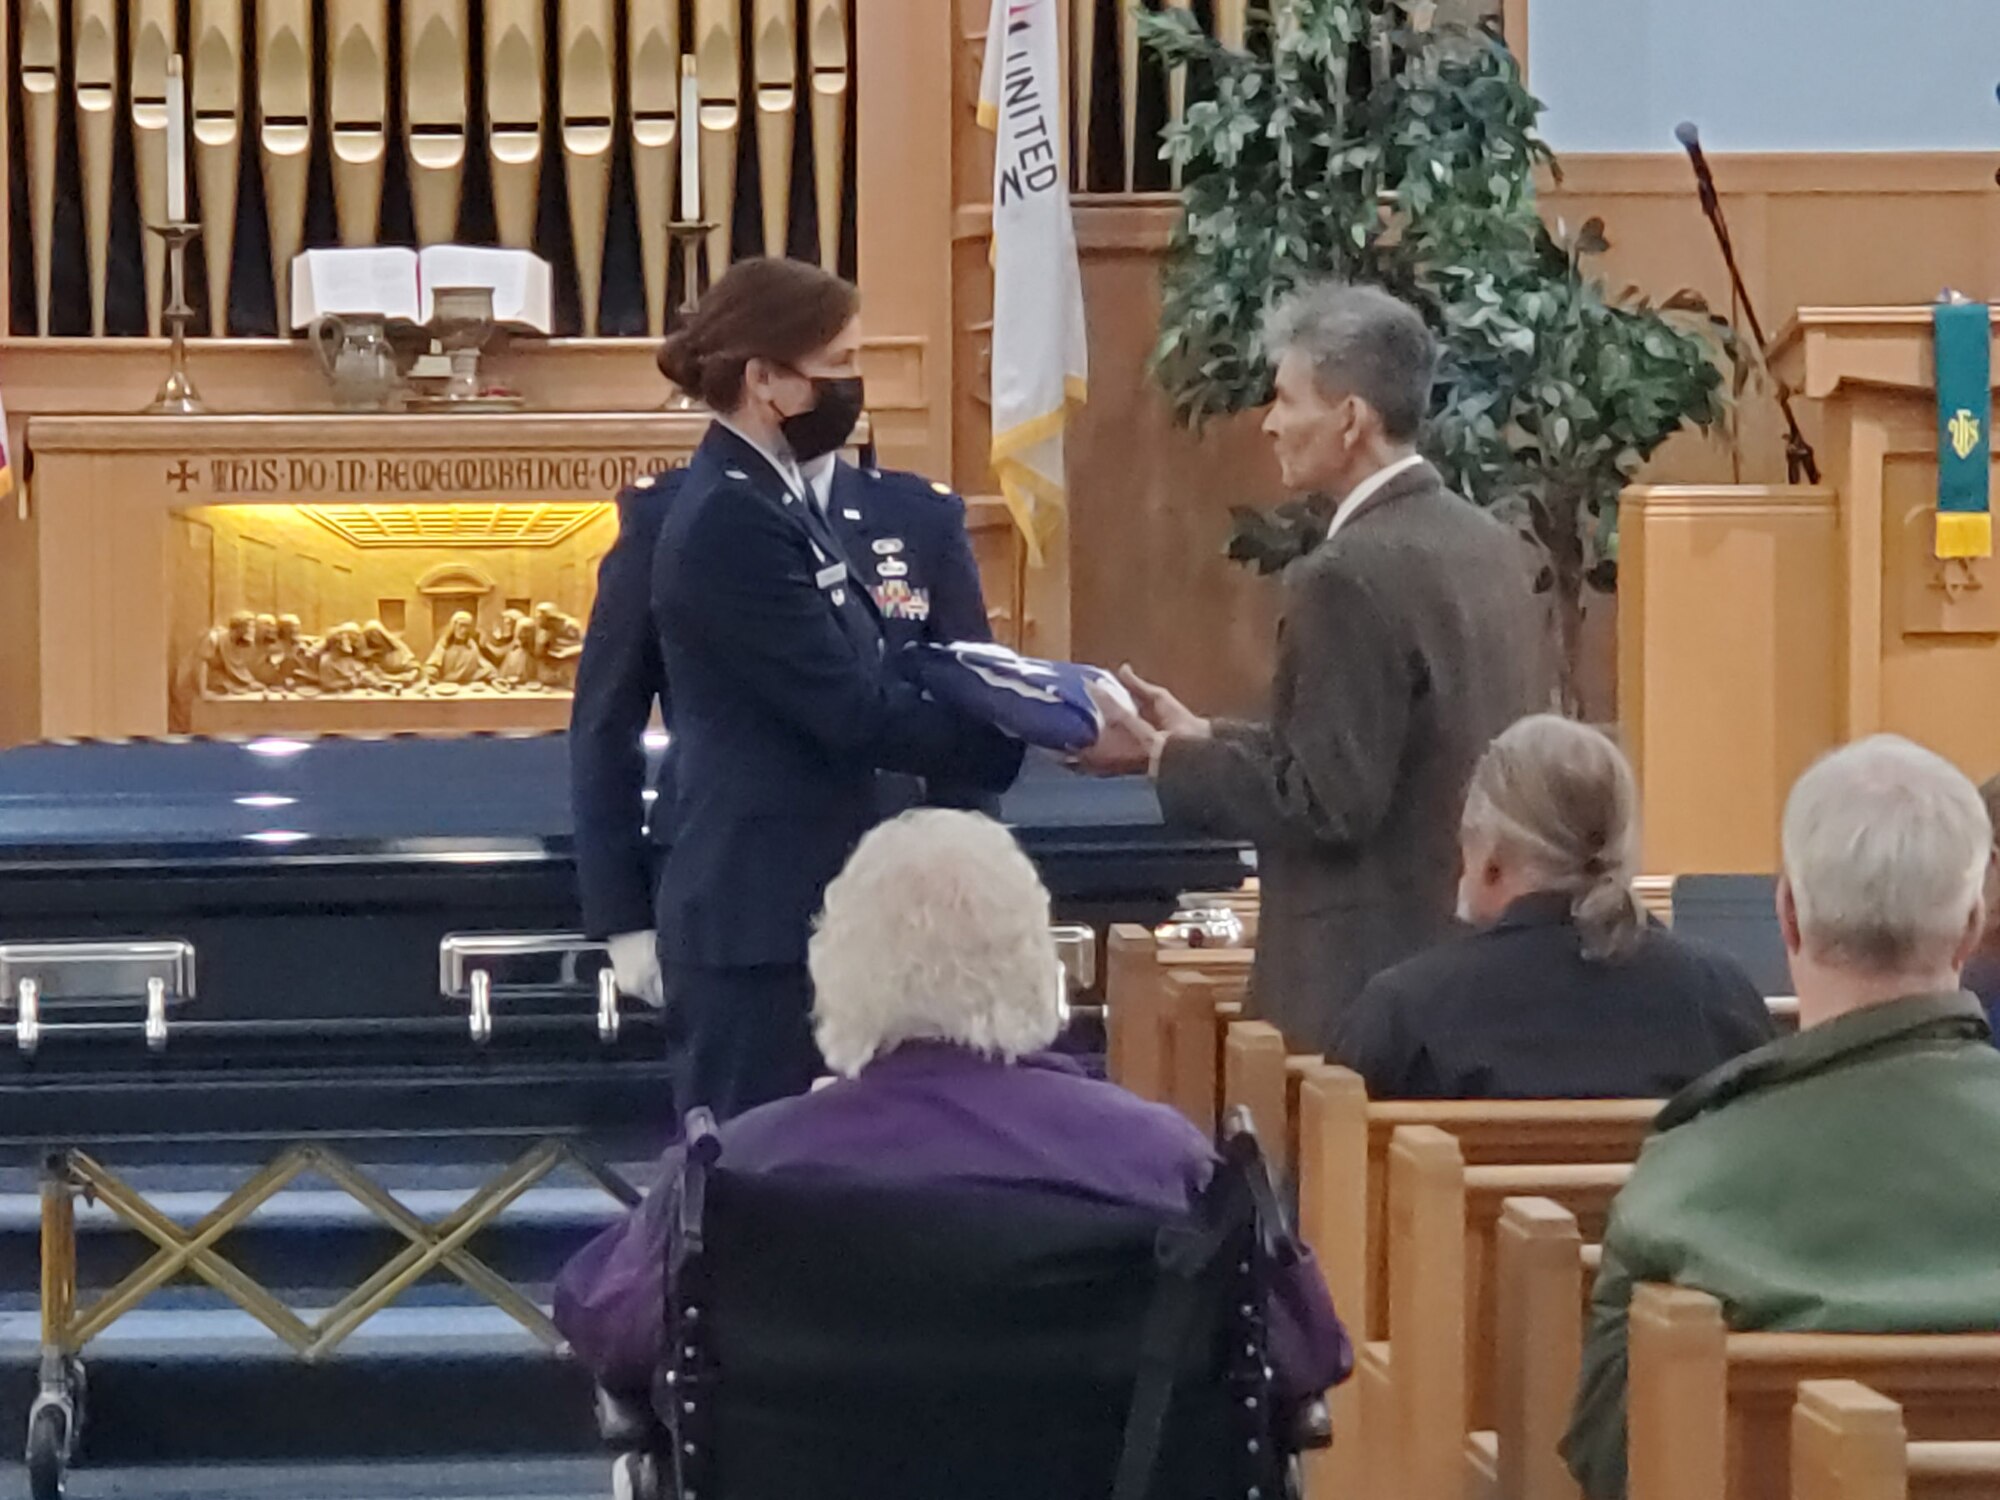 Lt. Col. (retired) Dianne Hickey, former 14th Intelligence Squadron commander, presents a flag to Tom, John “Jerry” Johnson’s beneficiary, during Johnson’s funeral service Oct. 23, 2021.  Hickey, along with current 14 IS reservists Maj. Andrew Soine and Senior Master Sgt. Jonathon Washington, conducted the funeral honors. Johnson had served in Guam during World War II with the Army Air Corps in the 20th Air Force 9th Photographic Technical Squadron. His squadron ultimately became the 14 IS.